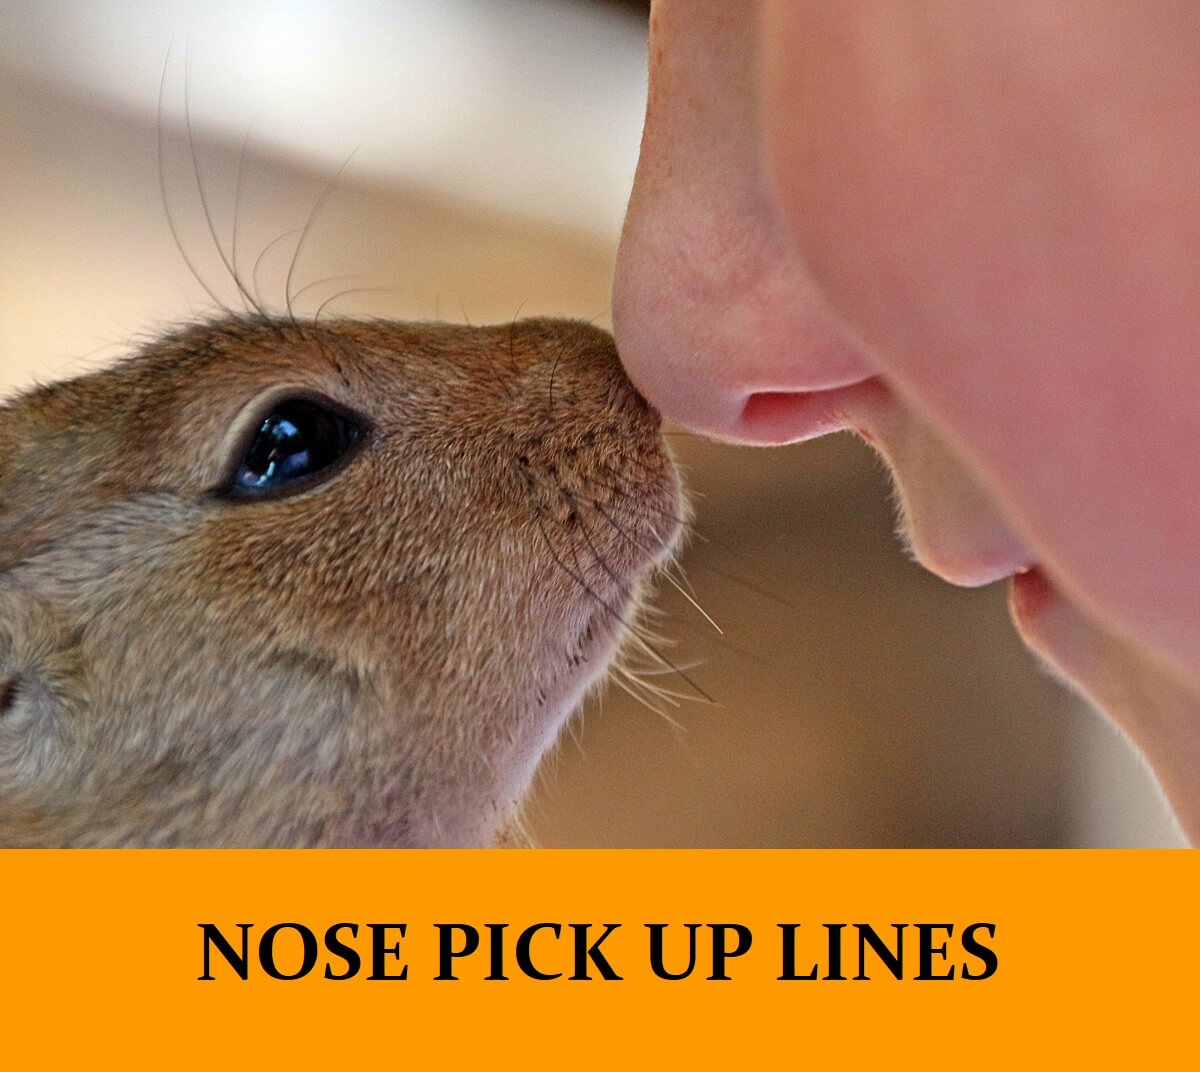 Pick Up Lines About Noses